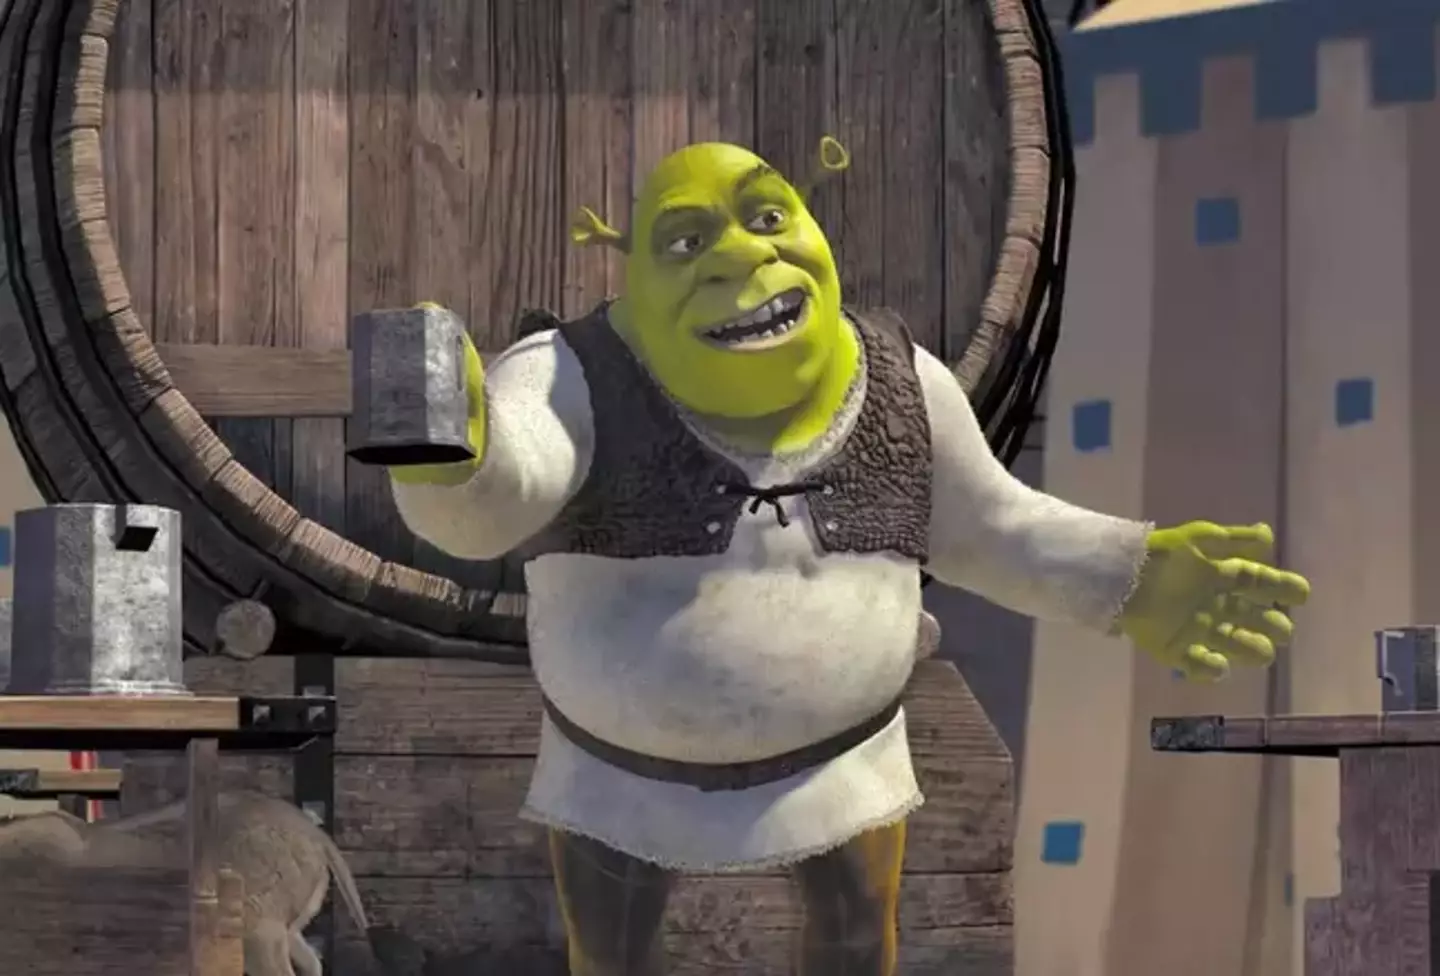 An employee of NBCUniversal entered the swamp without Shrek's permission after reportedly leaking the release date of the highly anticipated Shrek 5.